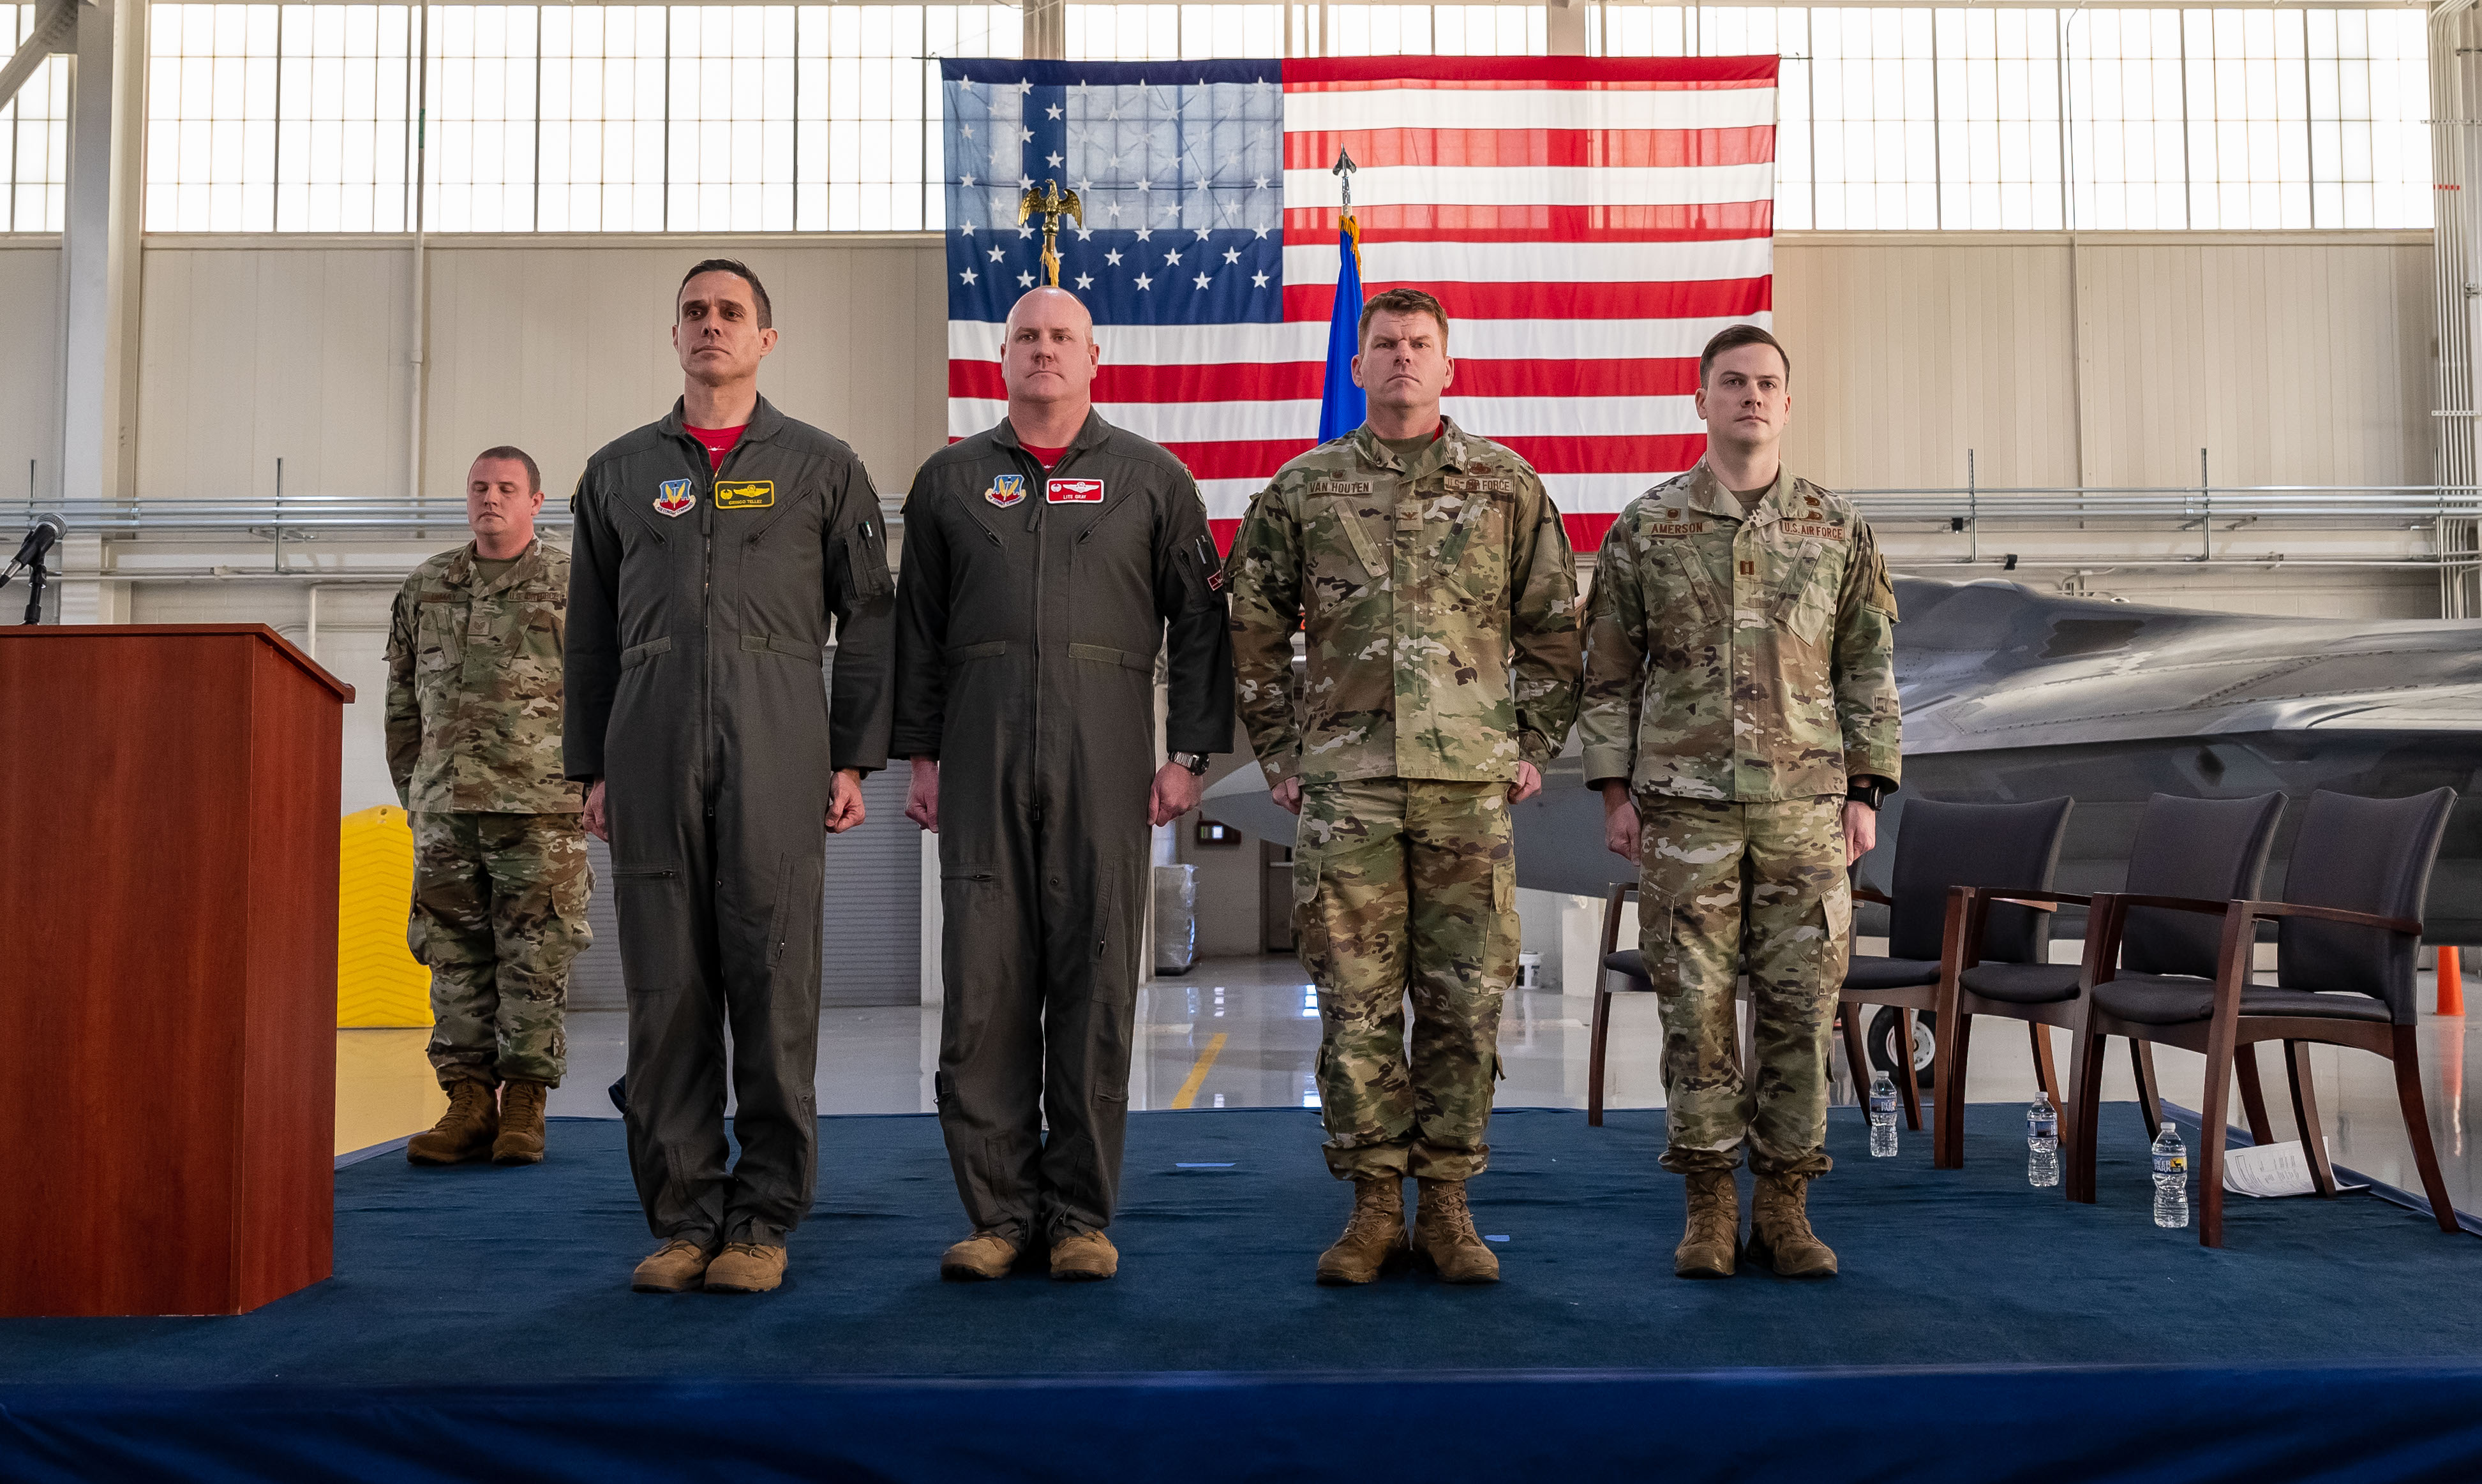 Welcome back: 71st FS rejoins America’s First Team, 71st FGS activates ...